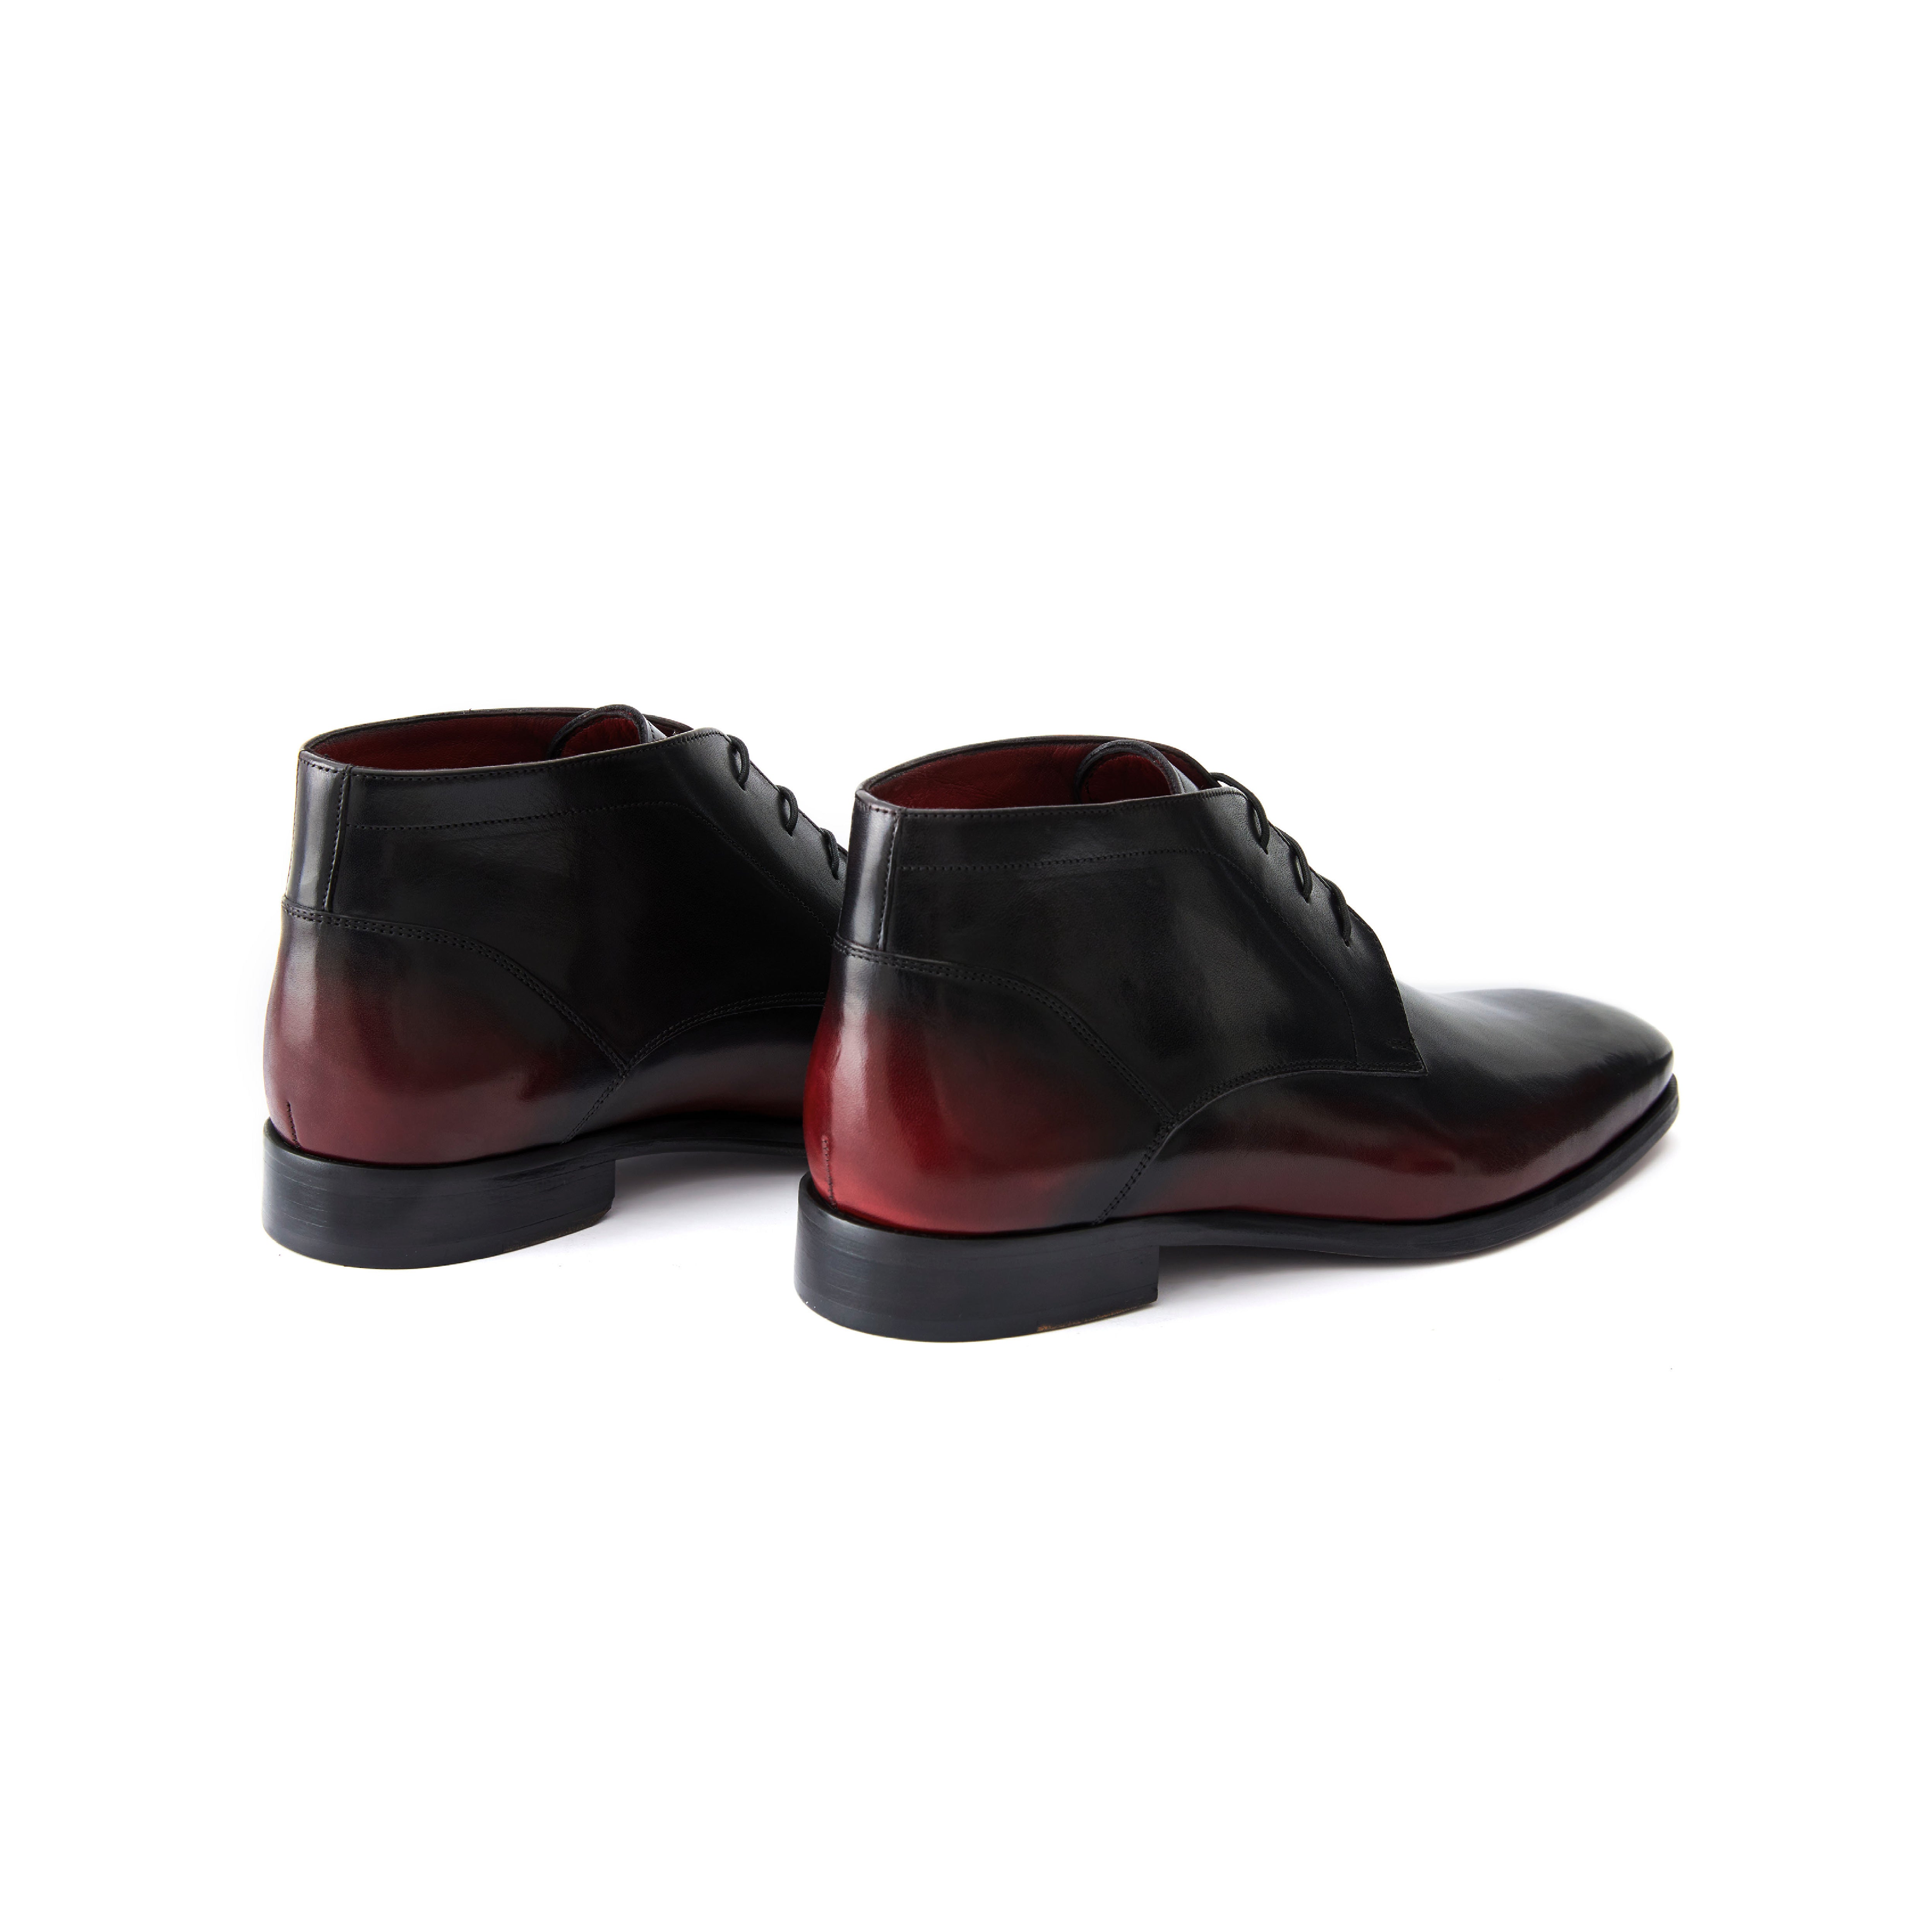 Men's Calf Leather Handmade Derby Boots M10001